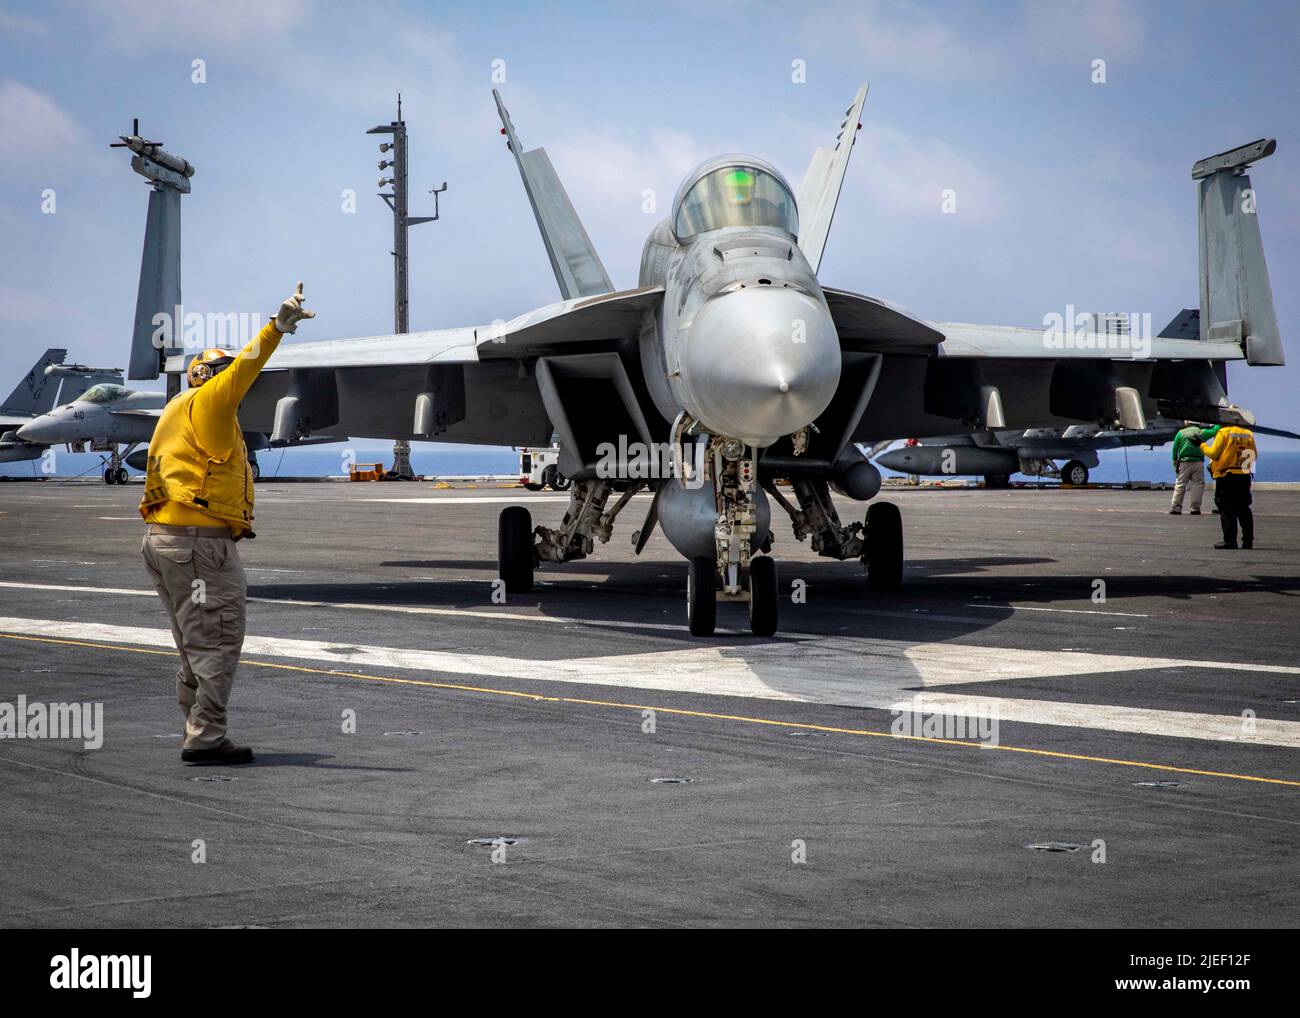 220624-N-OL632-1334 ATLANTIC OCEAN (June 24, 2022) Master Chief Aviation Boatswain’s Mate Shannon Hawkins, signals F/A-18E Super Hornet aircraft attached to Strike Fighter Squadron (VFA) 103 on the flight deck of the Nimitz-class aircraft carrier USS George H.W. Bush (CVN 77), June 24, 2022. The George H.W. Bush Carrier Strike Group (CSG) is underway completing a certification exercise to increase U.S. and allied interoperability and warfighting capability before a future deployment. The George H.W. Bush CSG is an integrated combat weapons system that delivers superior combat capability to det Stock Photo